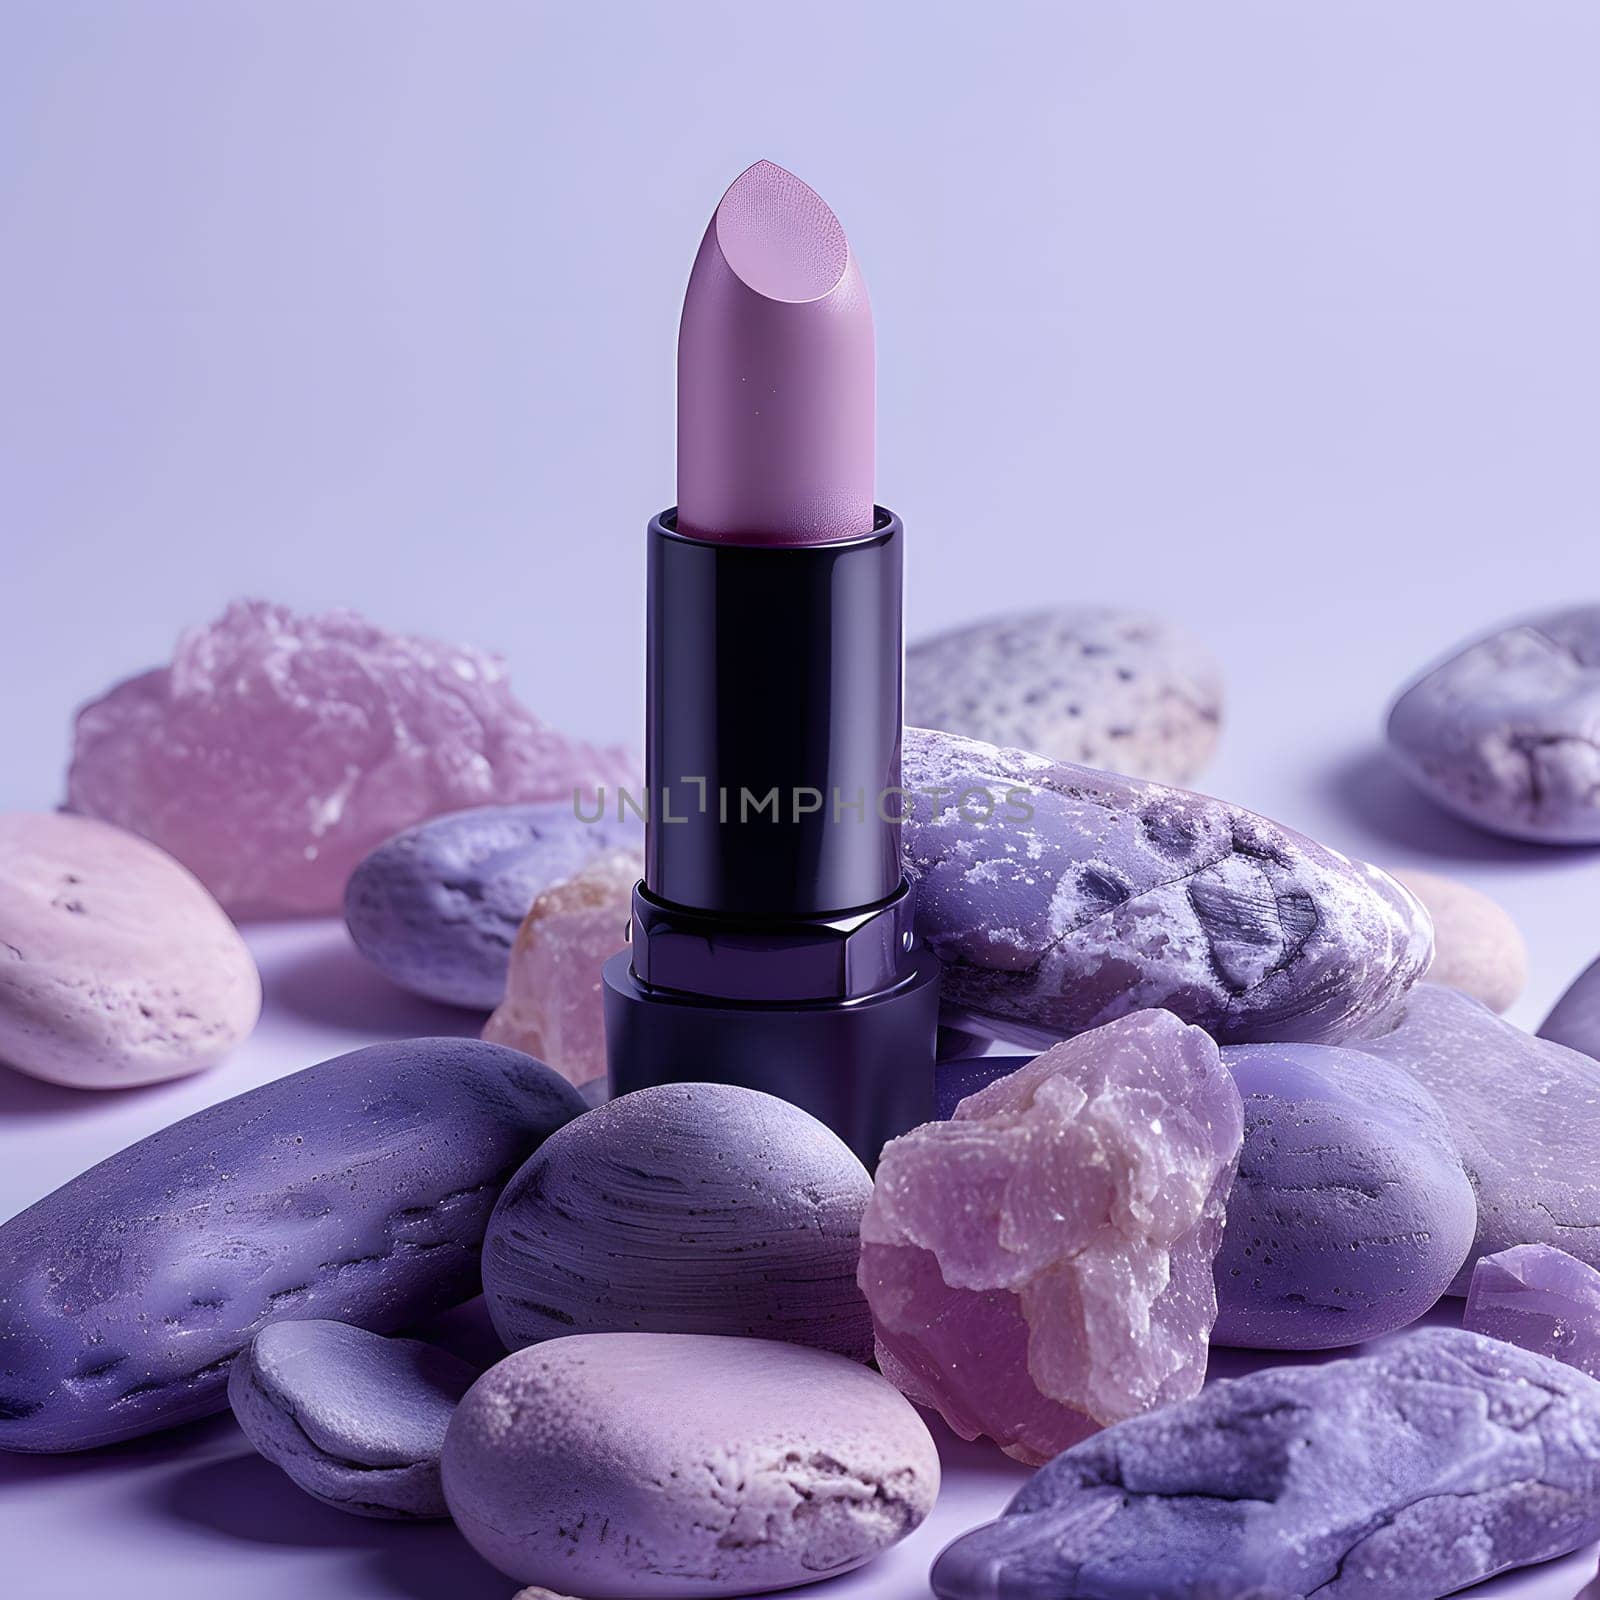 A liquid violet lipstick, a cosmetic made up of various ingredients including chemicals compounds and nutraceuticals, is set against a backdrop of purple rocks